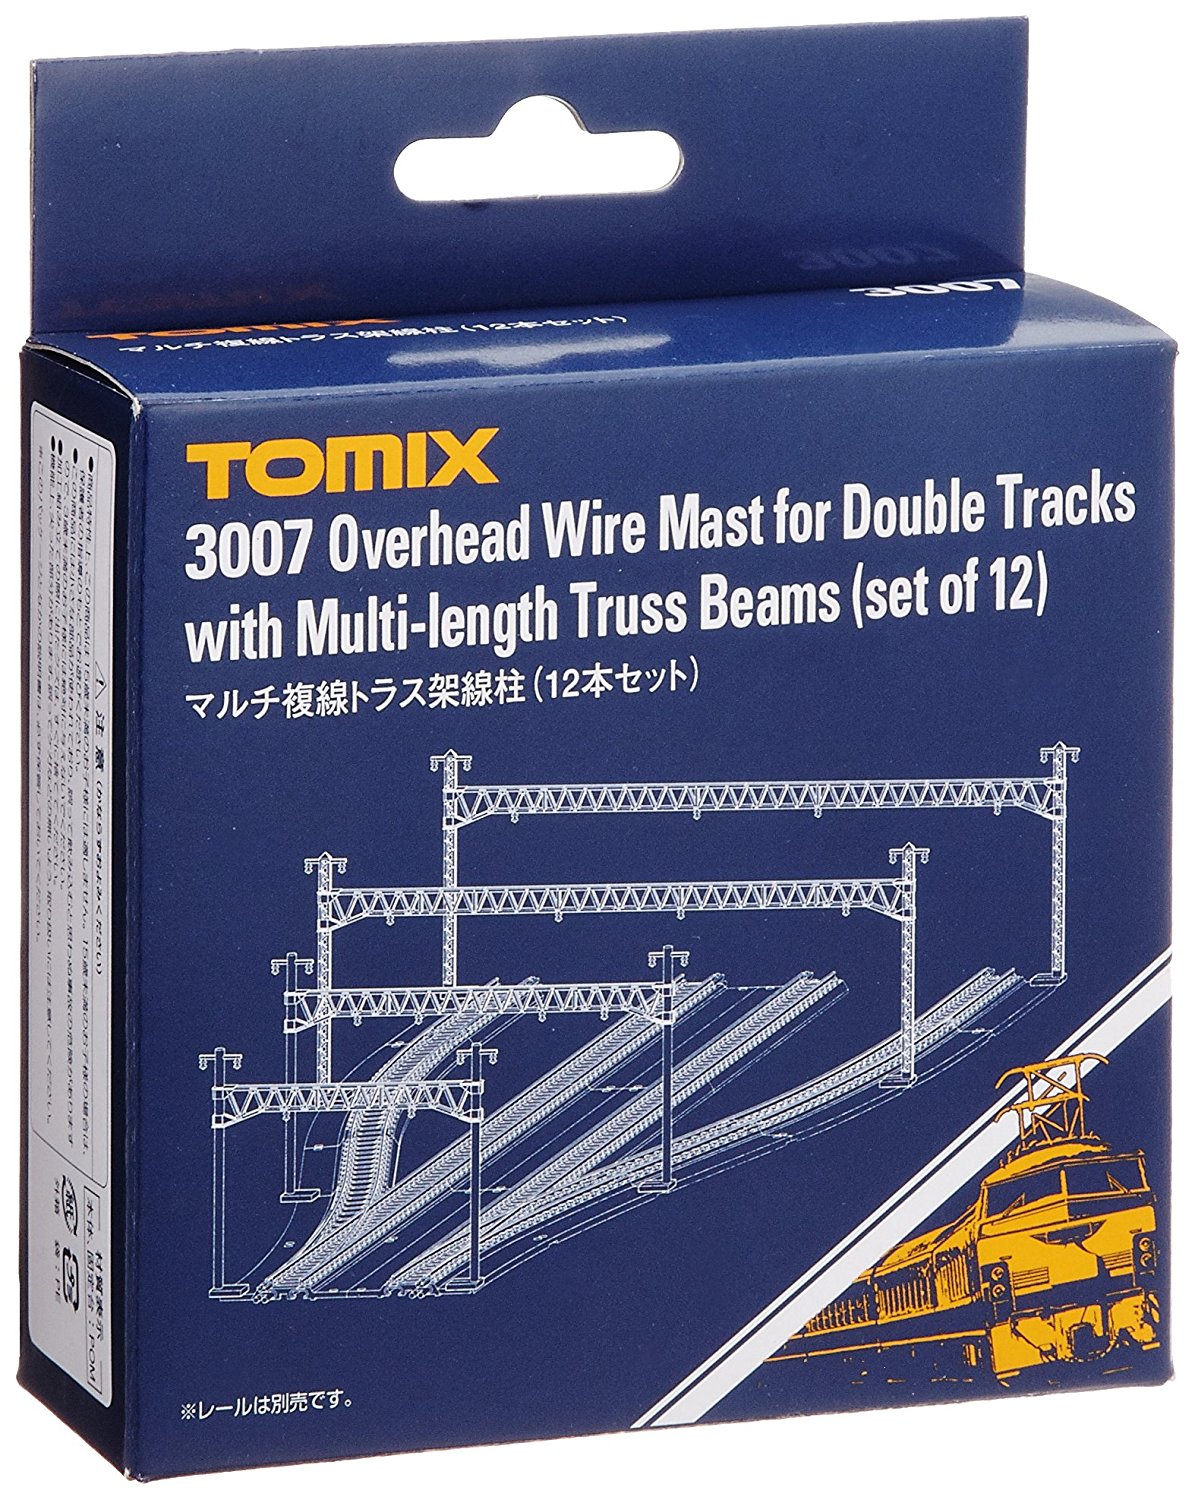 Overhead Wire Mast for Double Tracks w/ Multilength Truss Beams